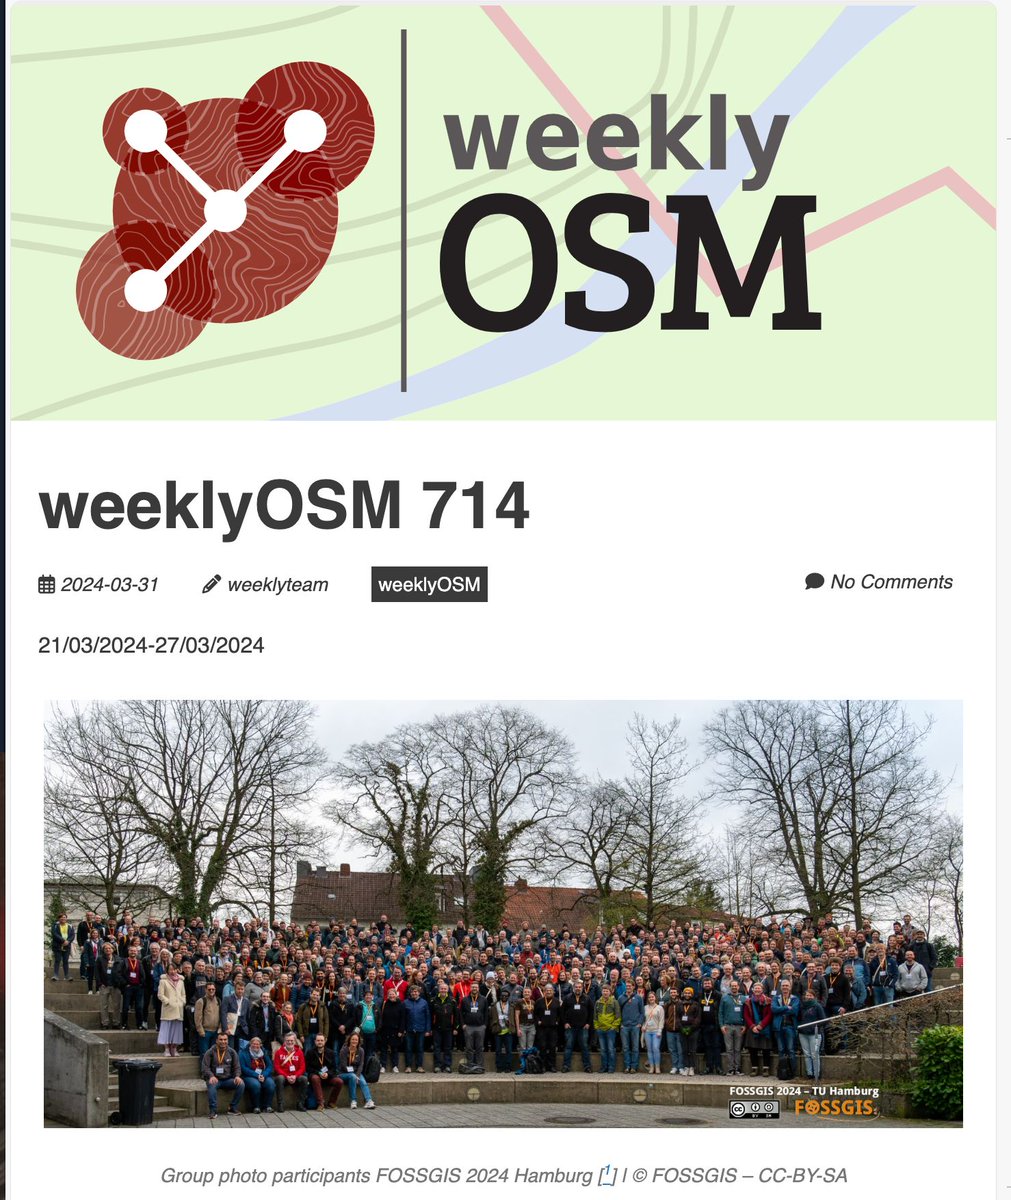 ...and there's so much more in the WeeklyOSM 714 including: more user diaries, event listings, software news, releases, and the always useful 'did you know ...' section. Check it out! buff.ly/4afRwg3